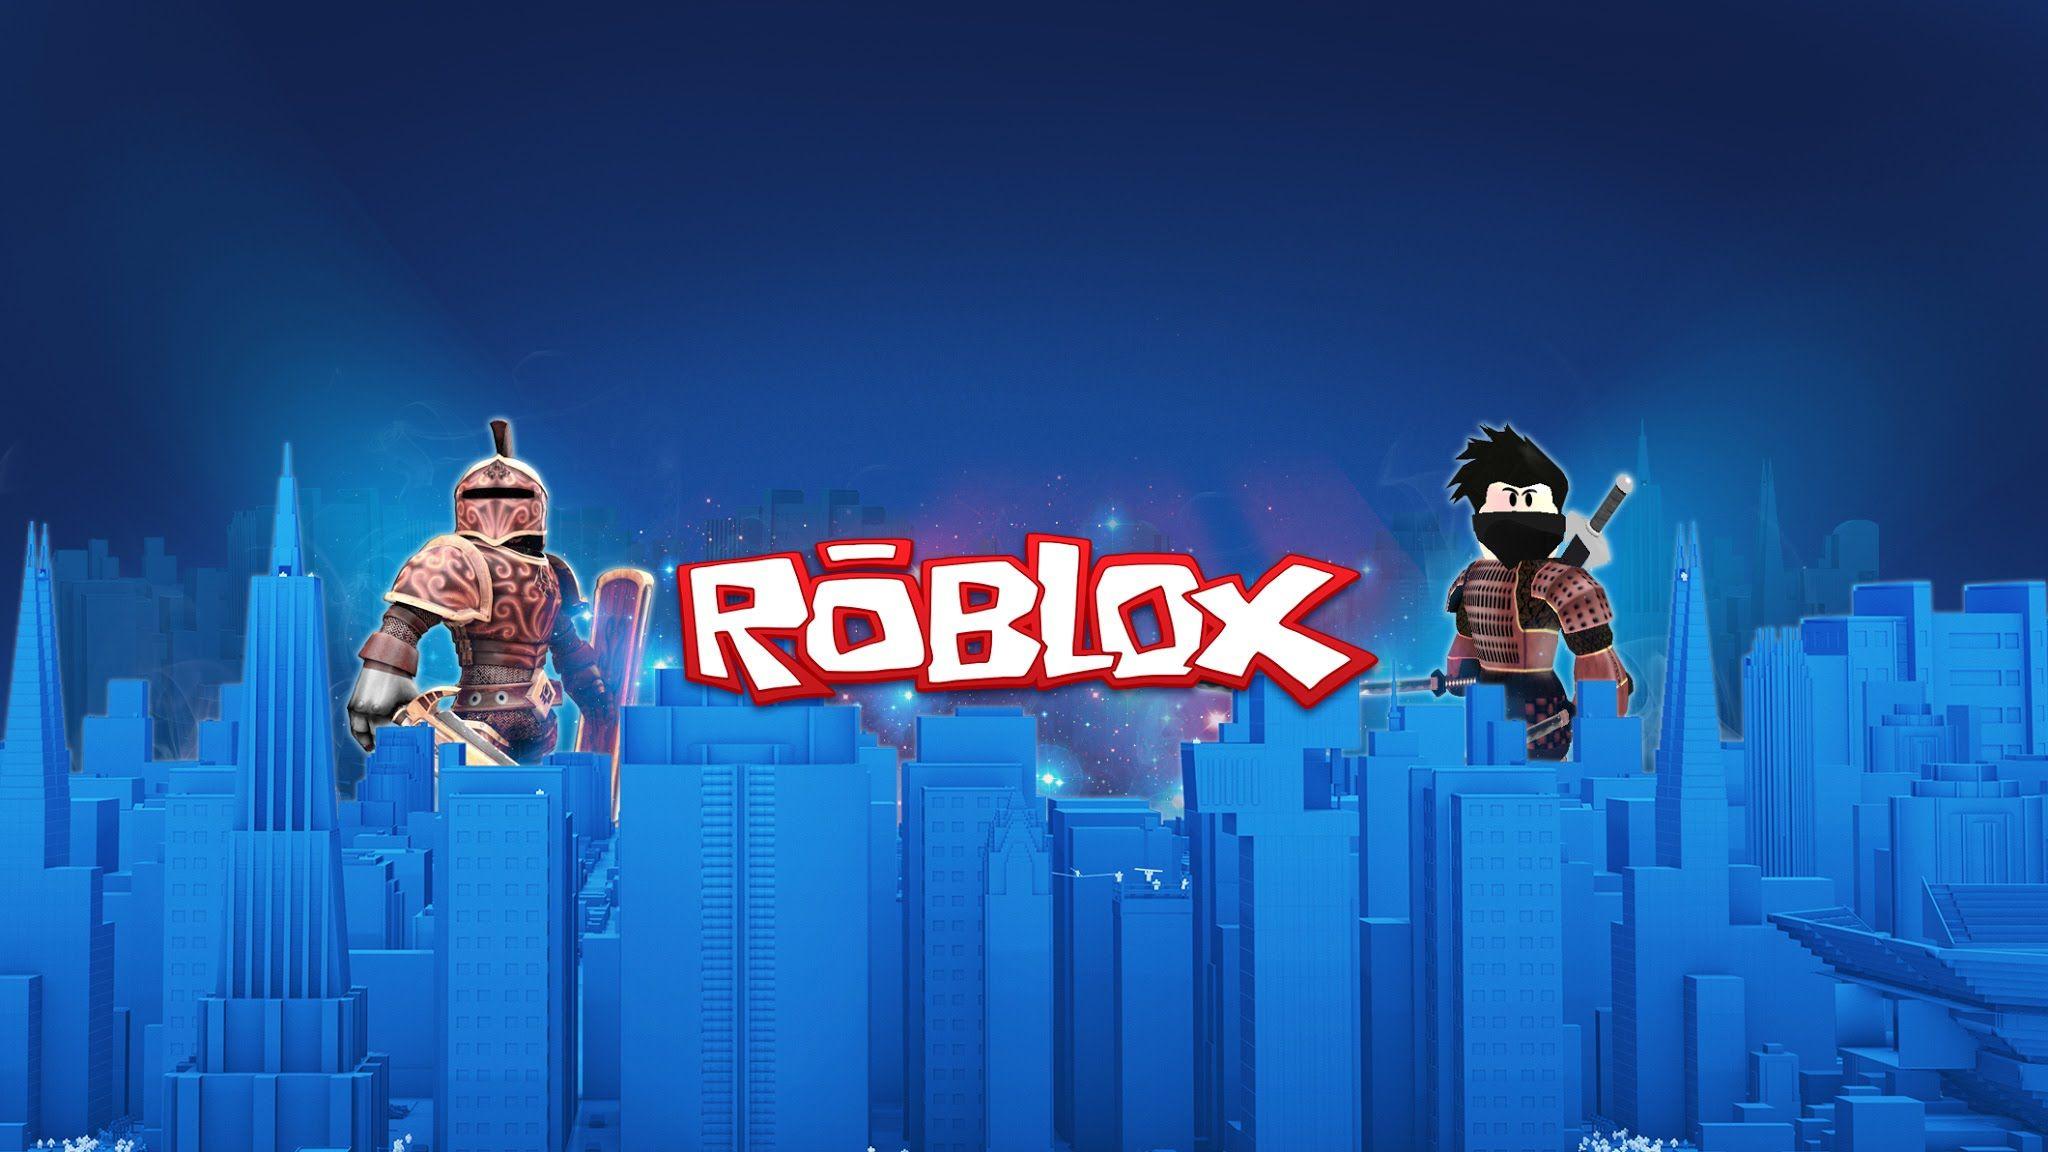 This is awesome, the Flash is here in Roblox